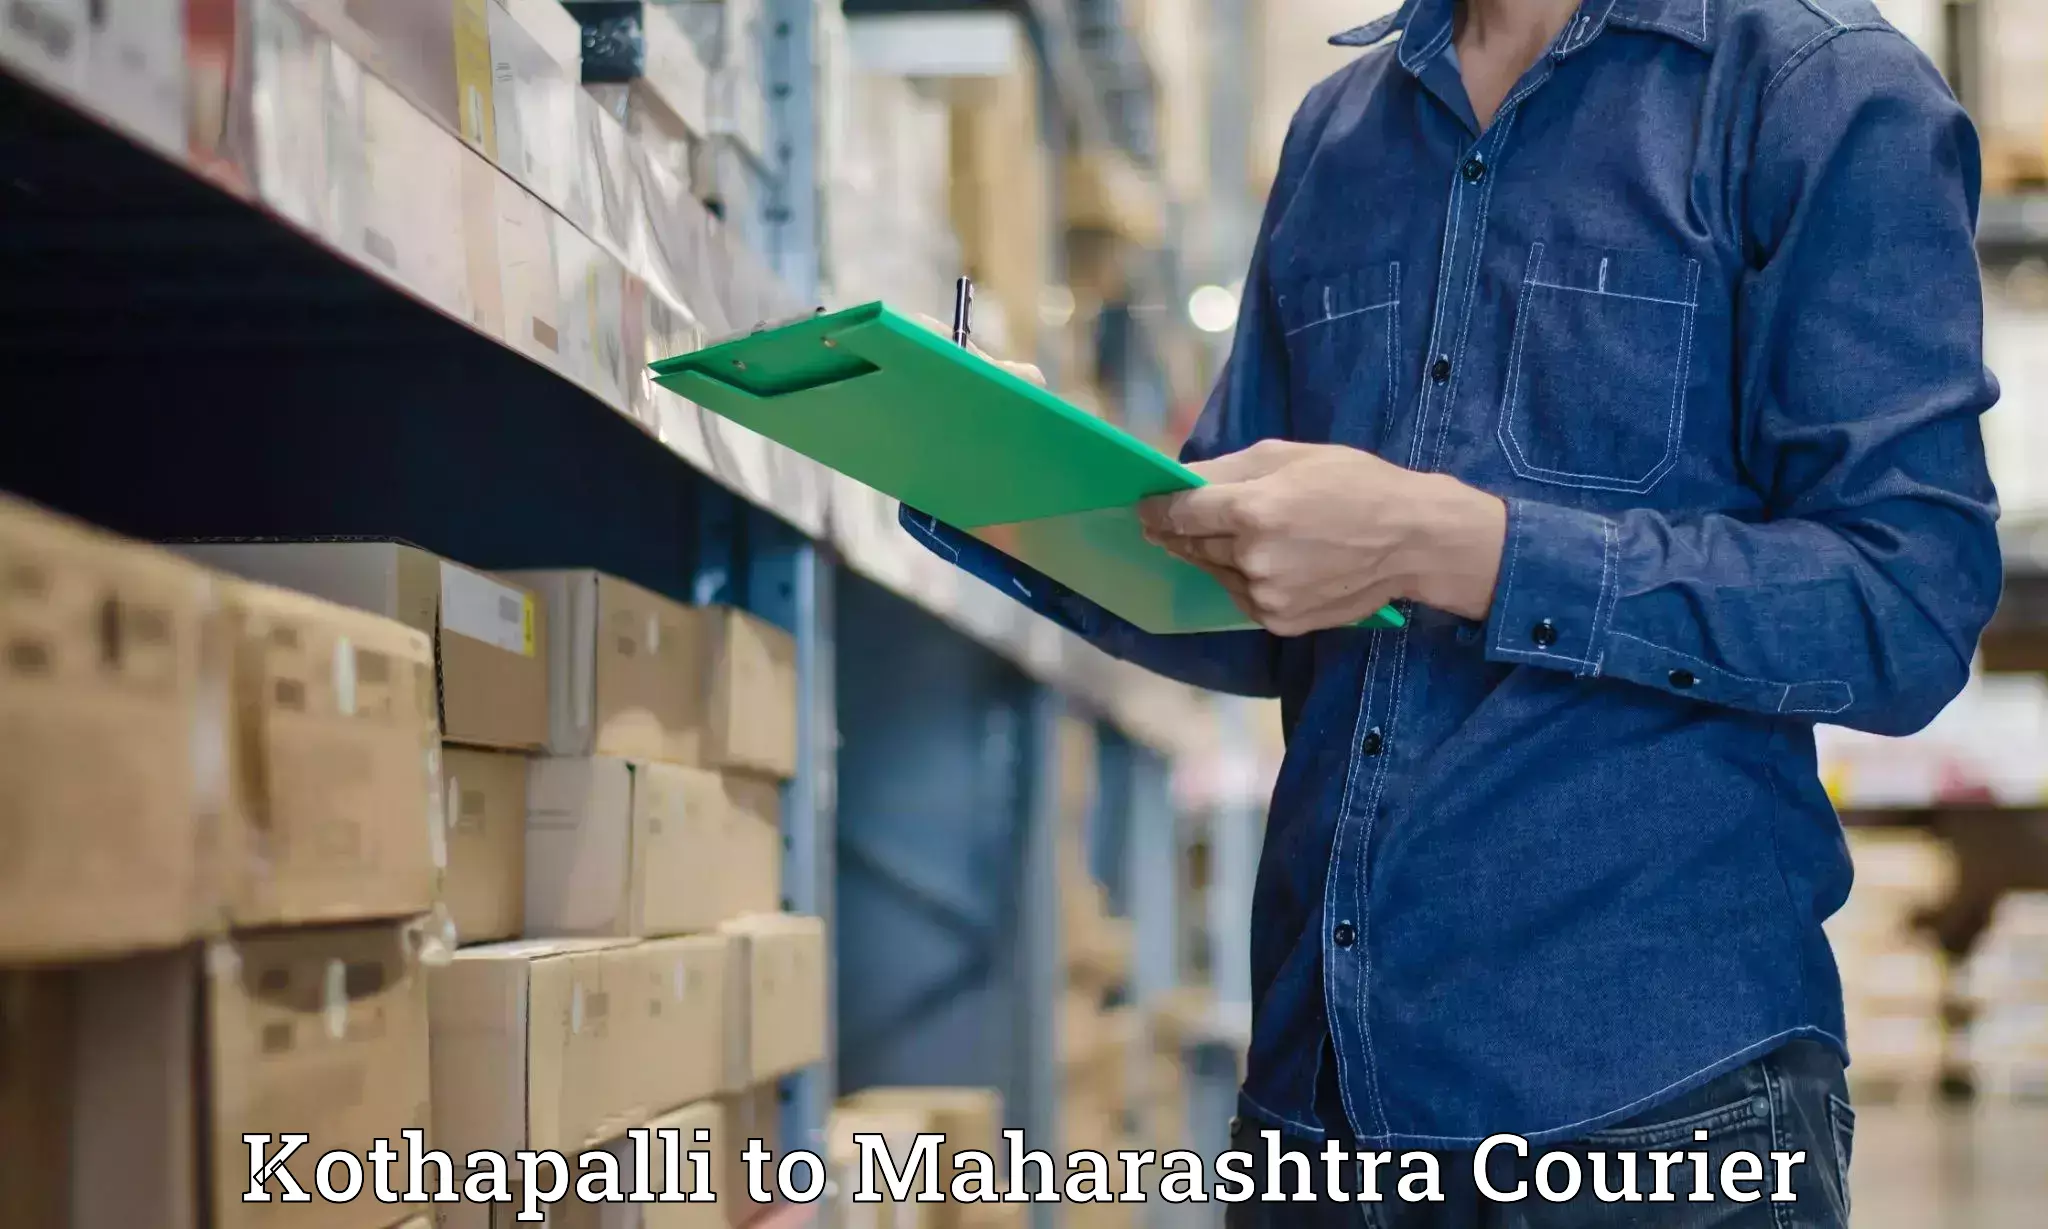 Business delivery service Kothapalli to Bhiwandi